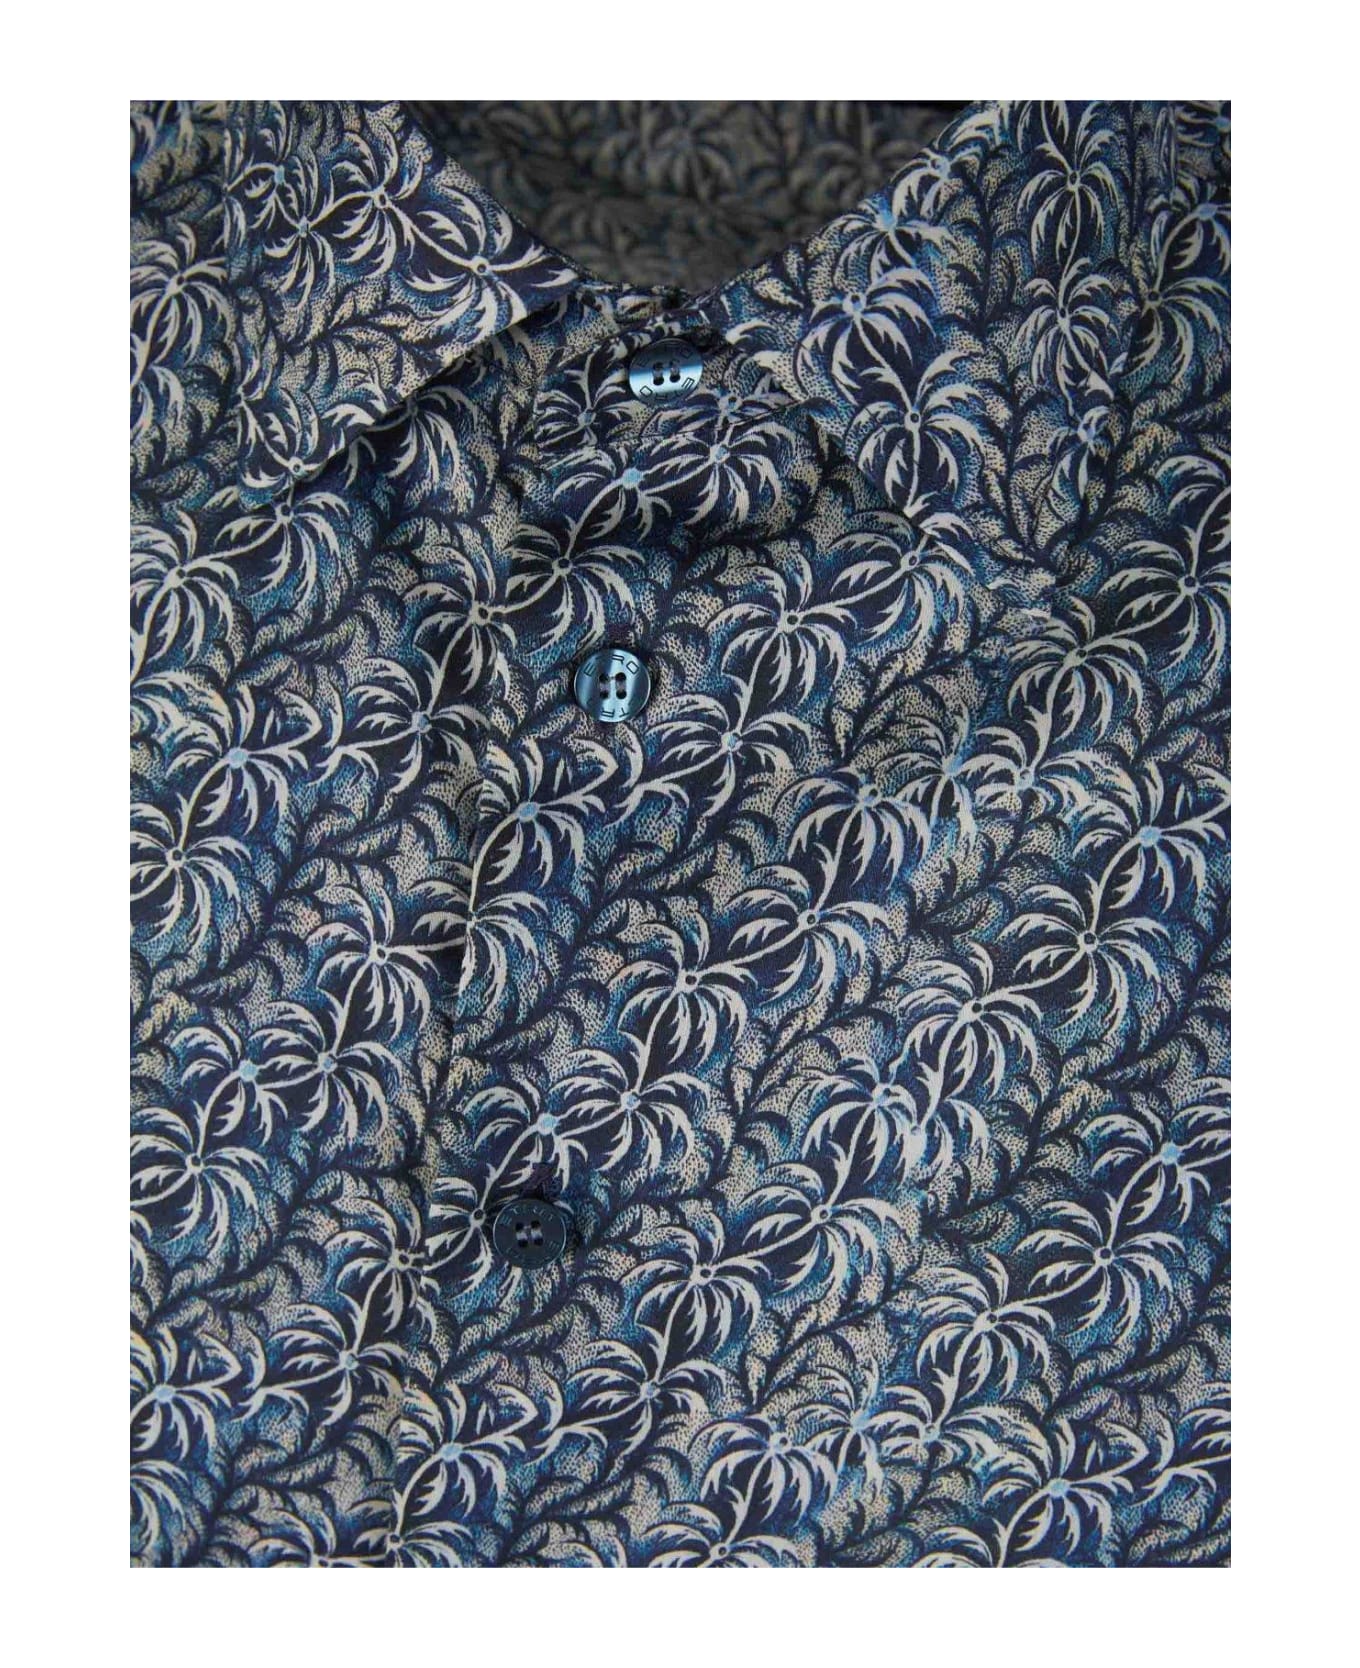 Etro Allover Printed Long-sleeved Shirt - Stampa f.do azzurro